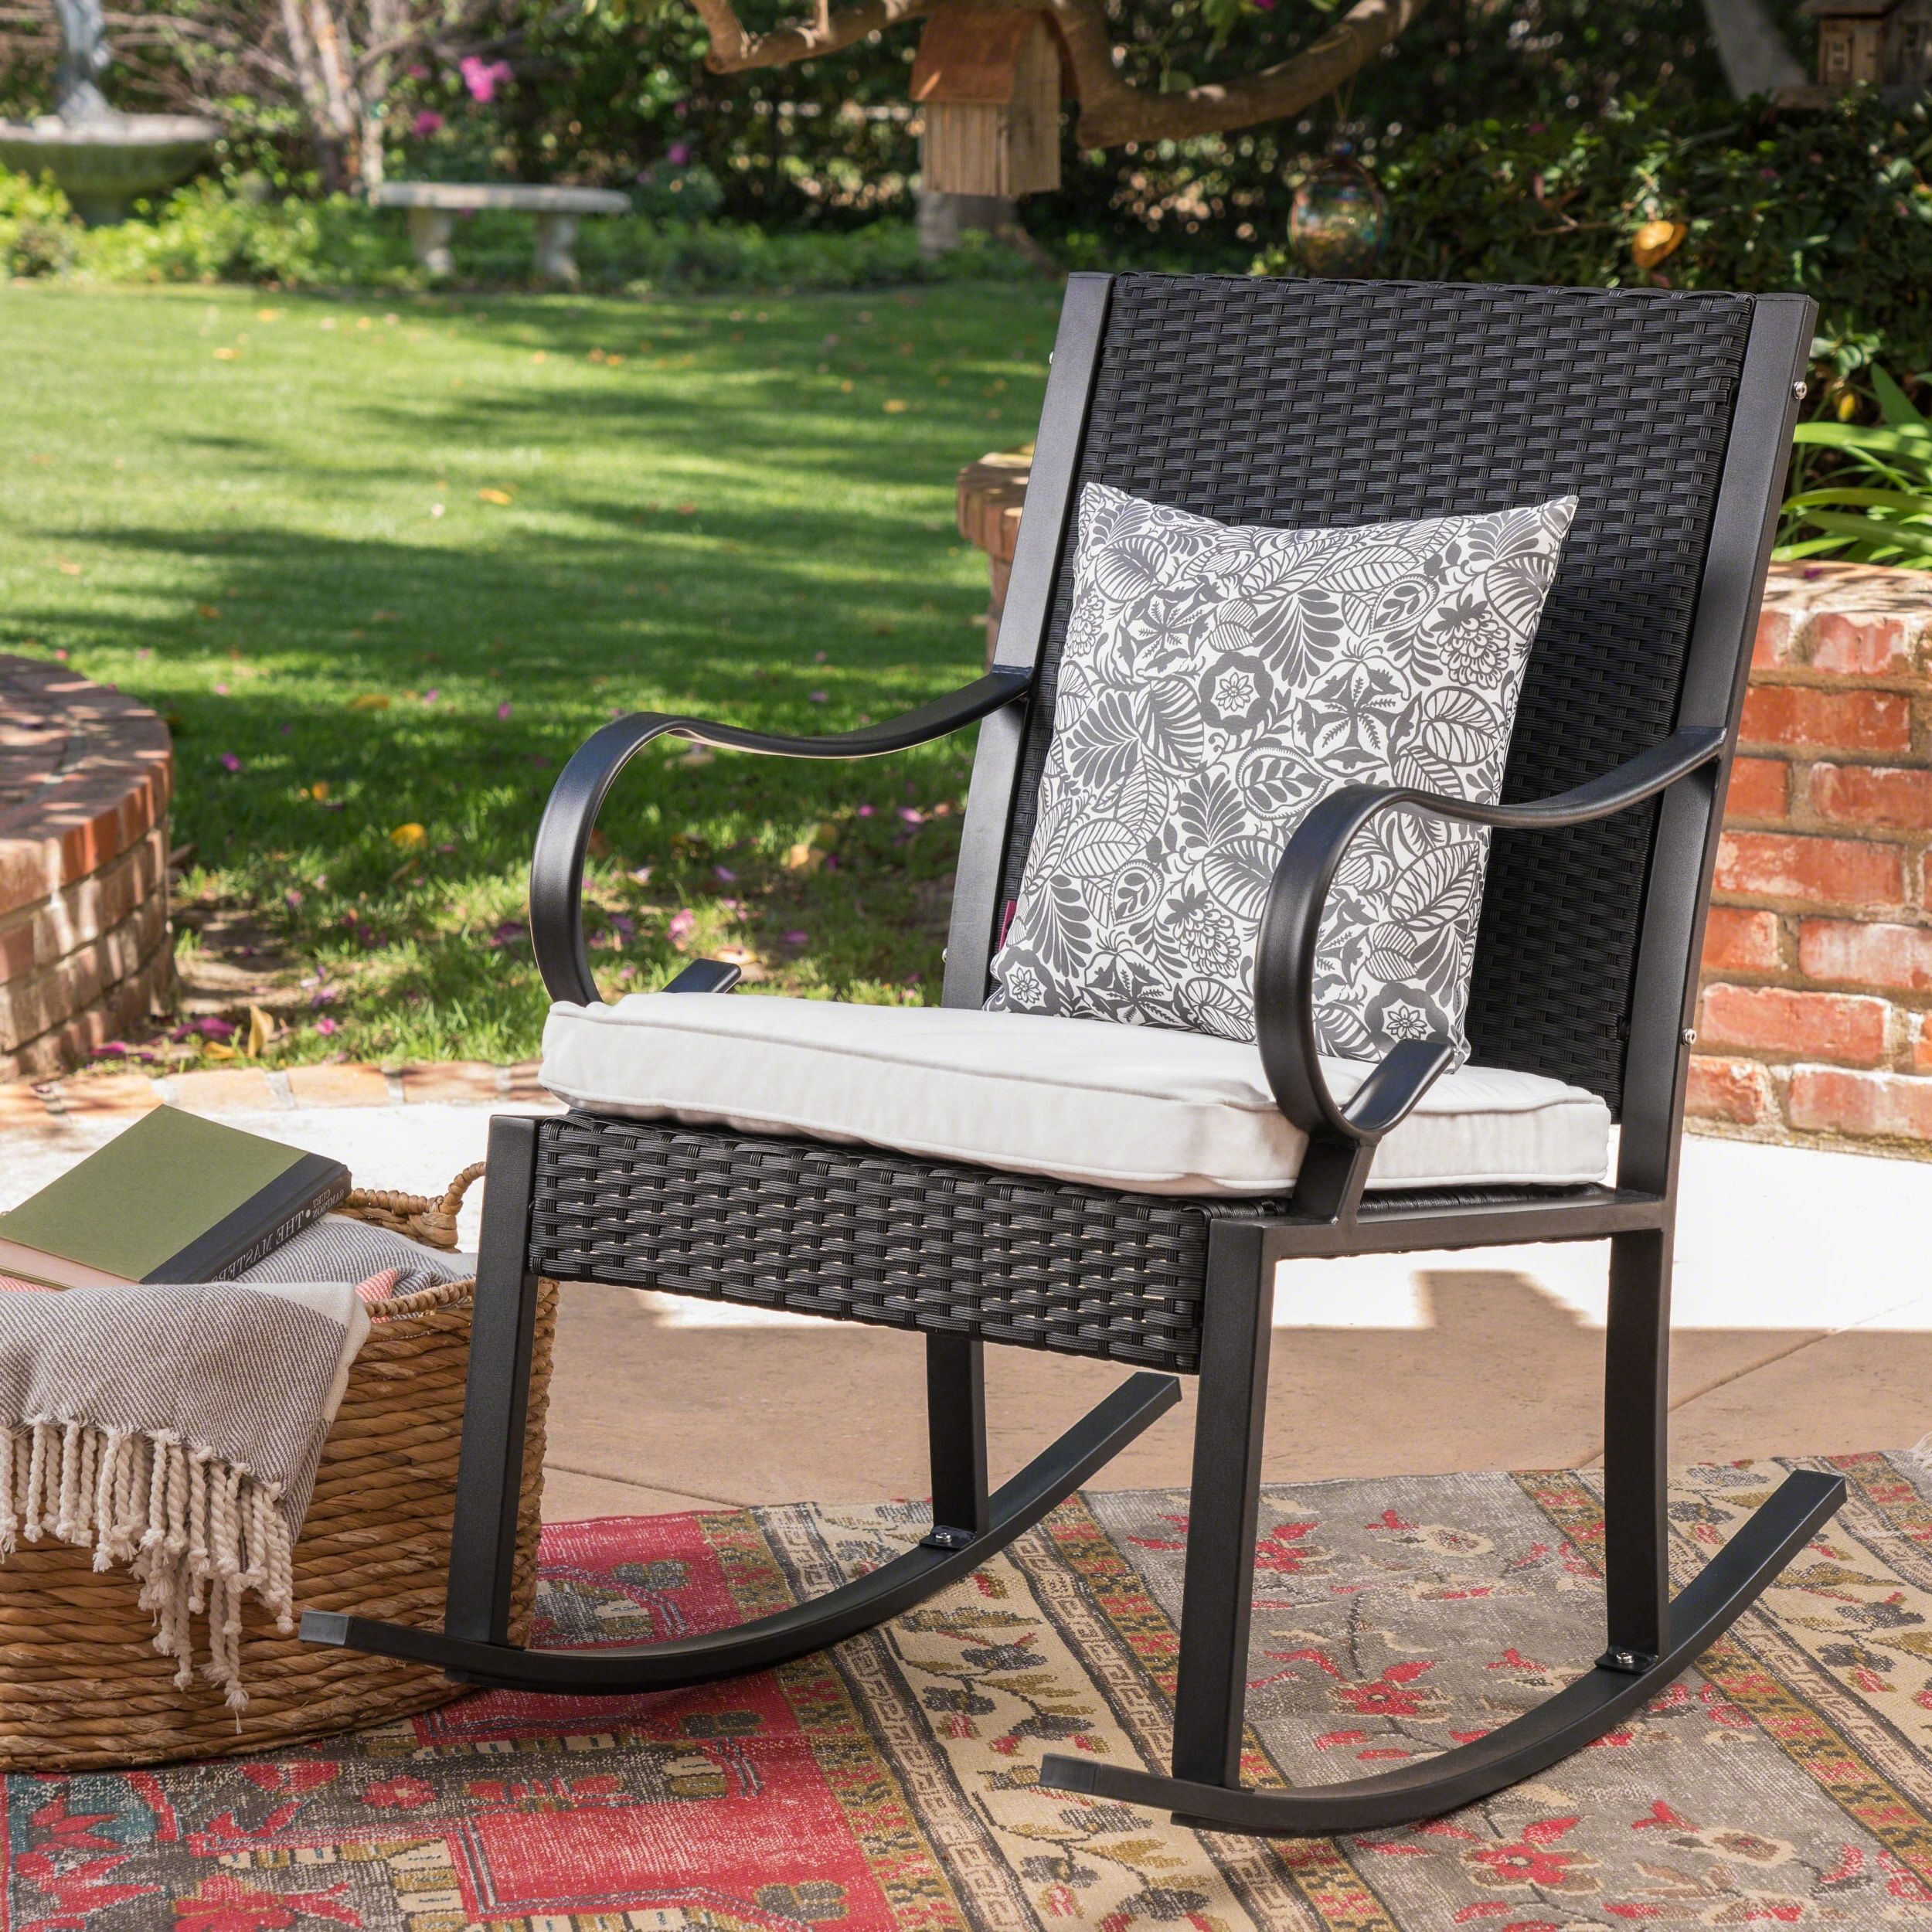 Fashionable August Grove Kampmann Outdoor Wicker Rocking Chair With Cushions With Regard To Outdoor Wicker Rocking Chairs With Cushions (View 8 of 15)